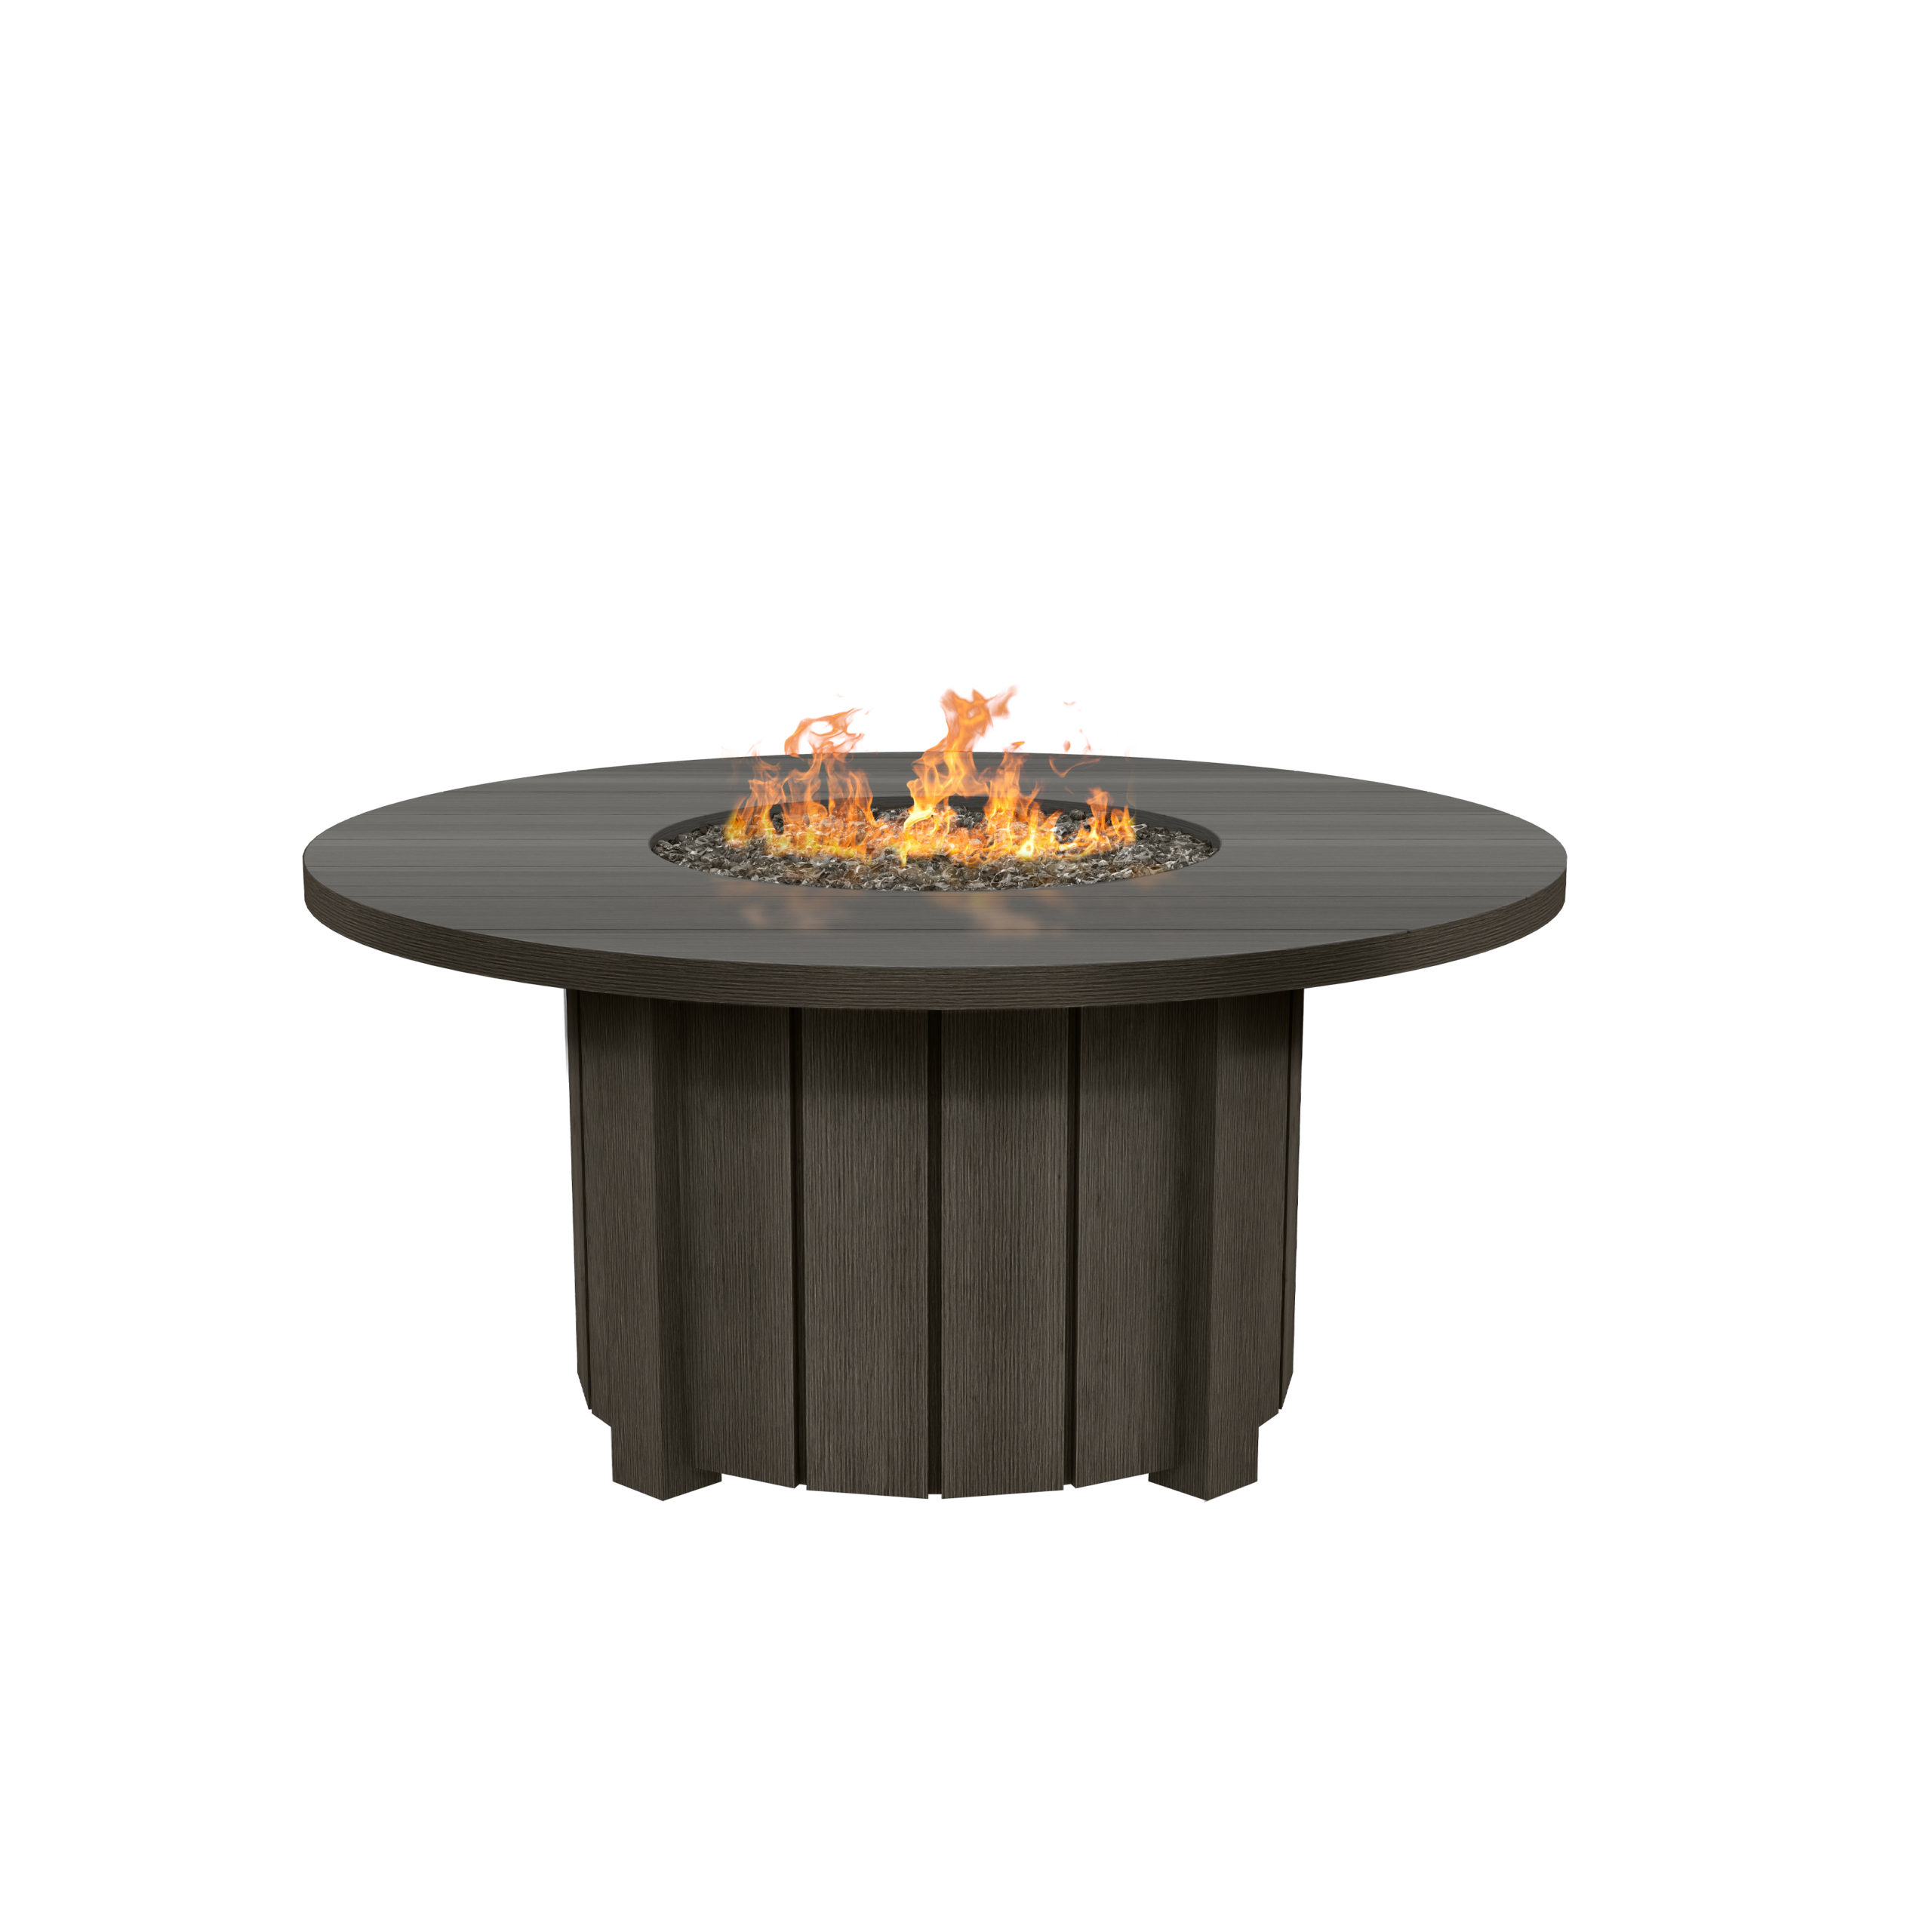 To 50 Round Fire Pit Florida, Fire Pit Under 50